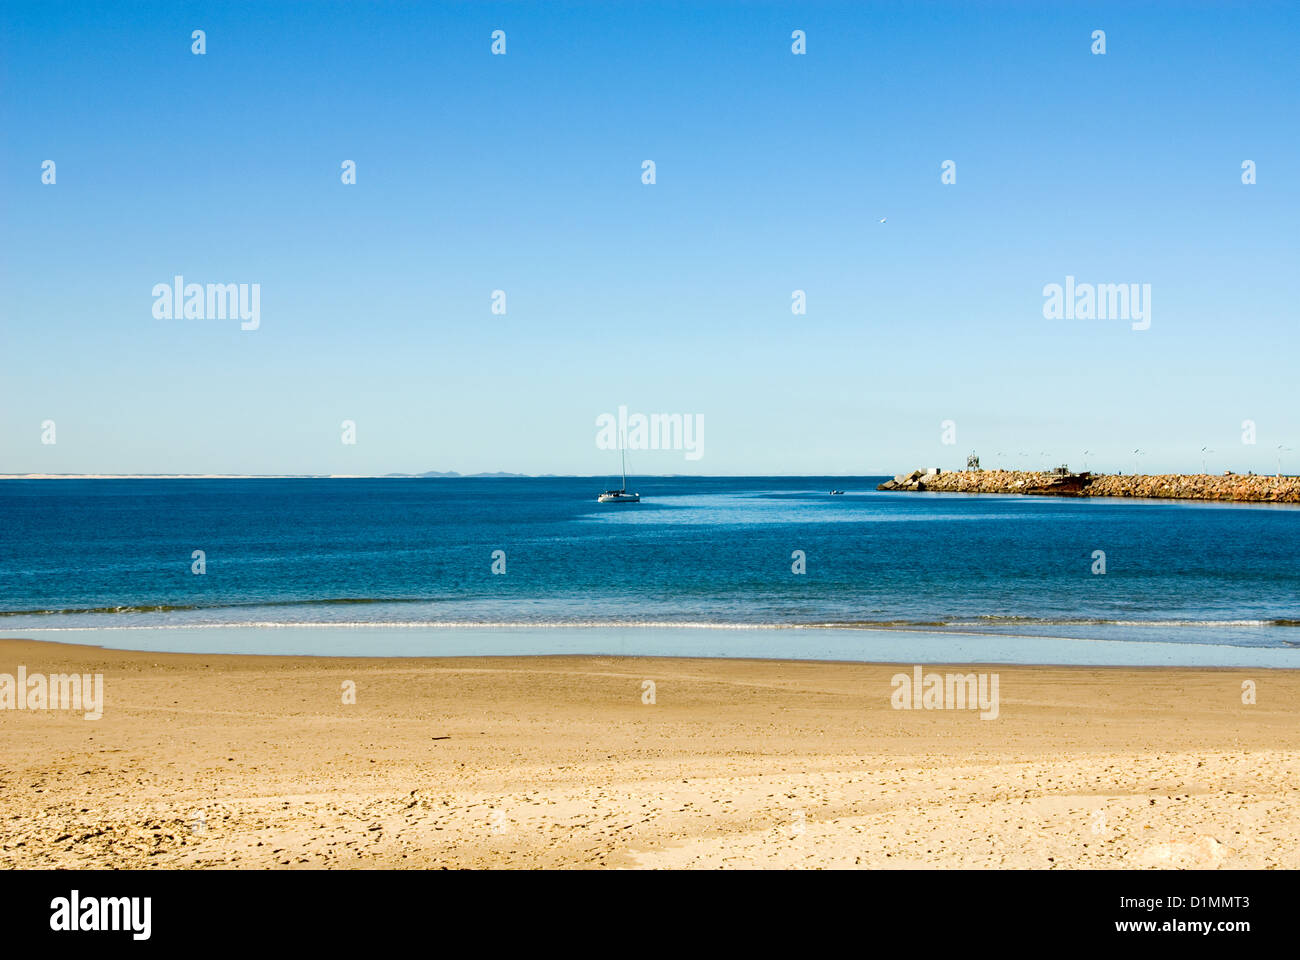 The entrance to Nelson Bay Harbour, Port Stephens, New South Wales, Australia Stock Photo